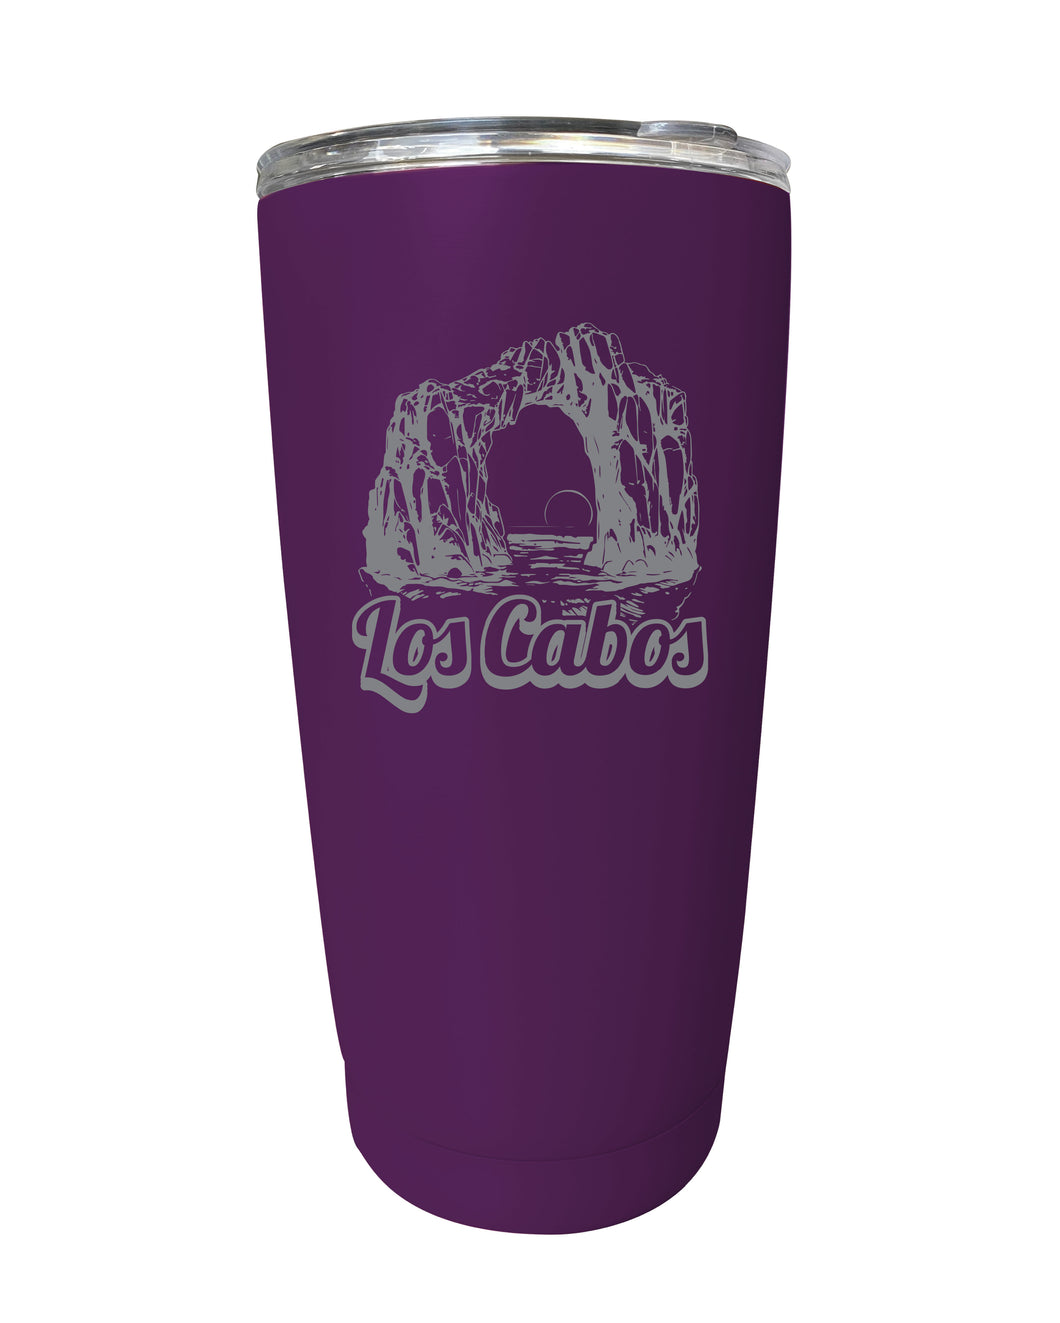 Los Cabos Mexico Souvenir 16 oz Engraved Stainless Steel Insulated Tumbler